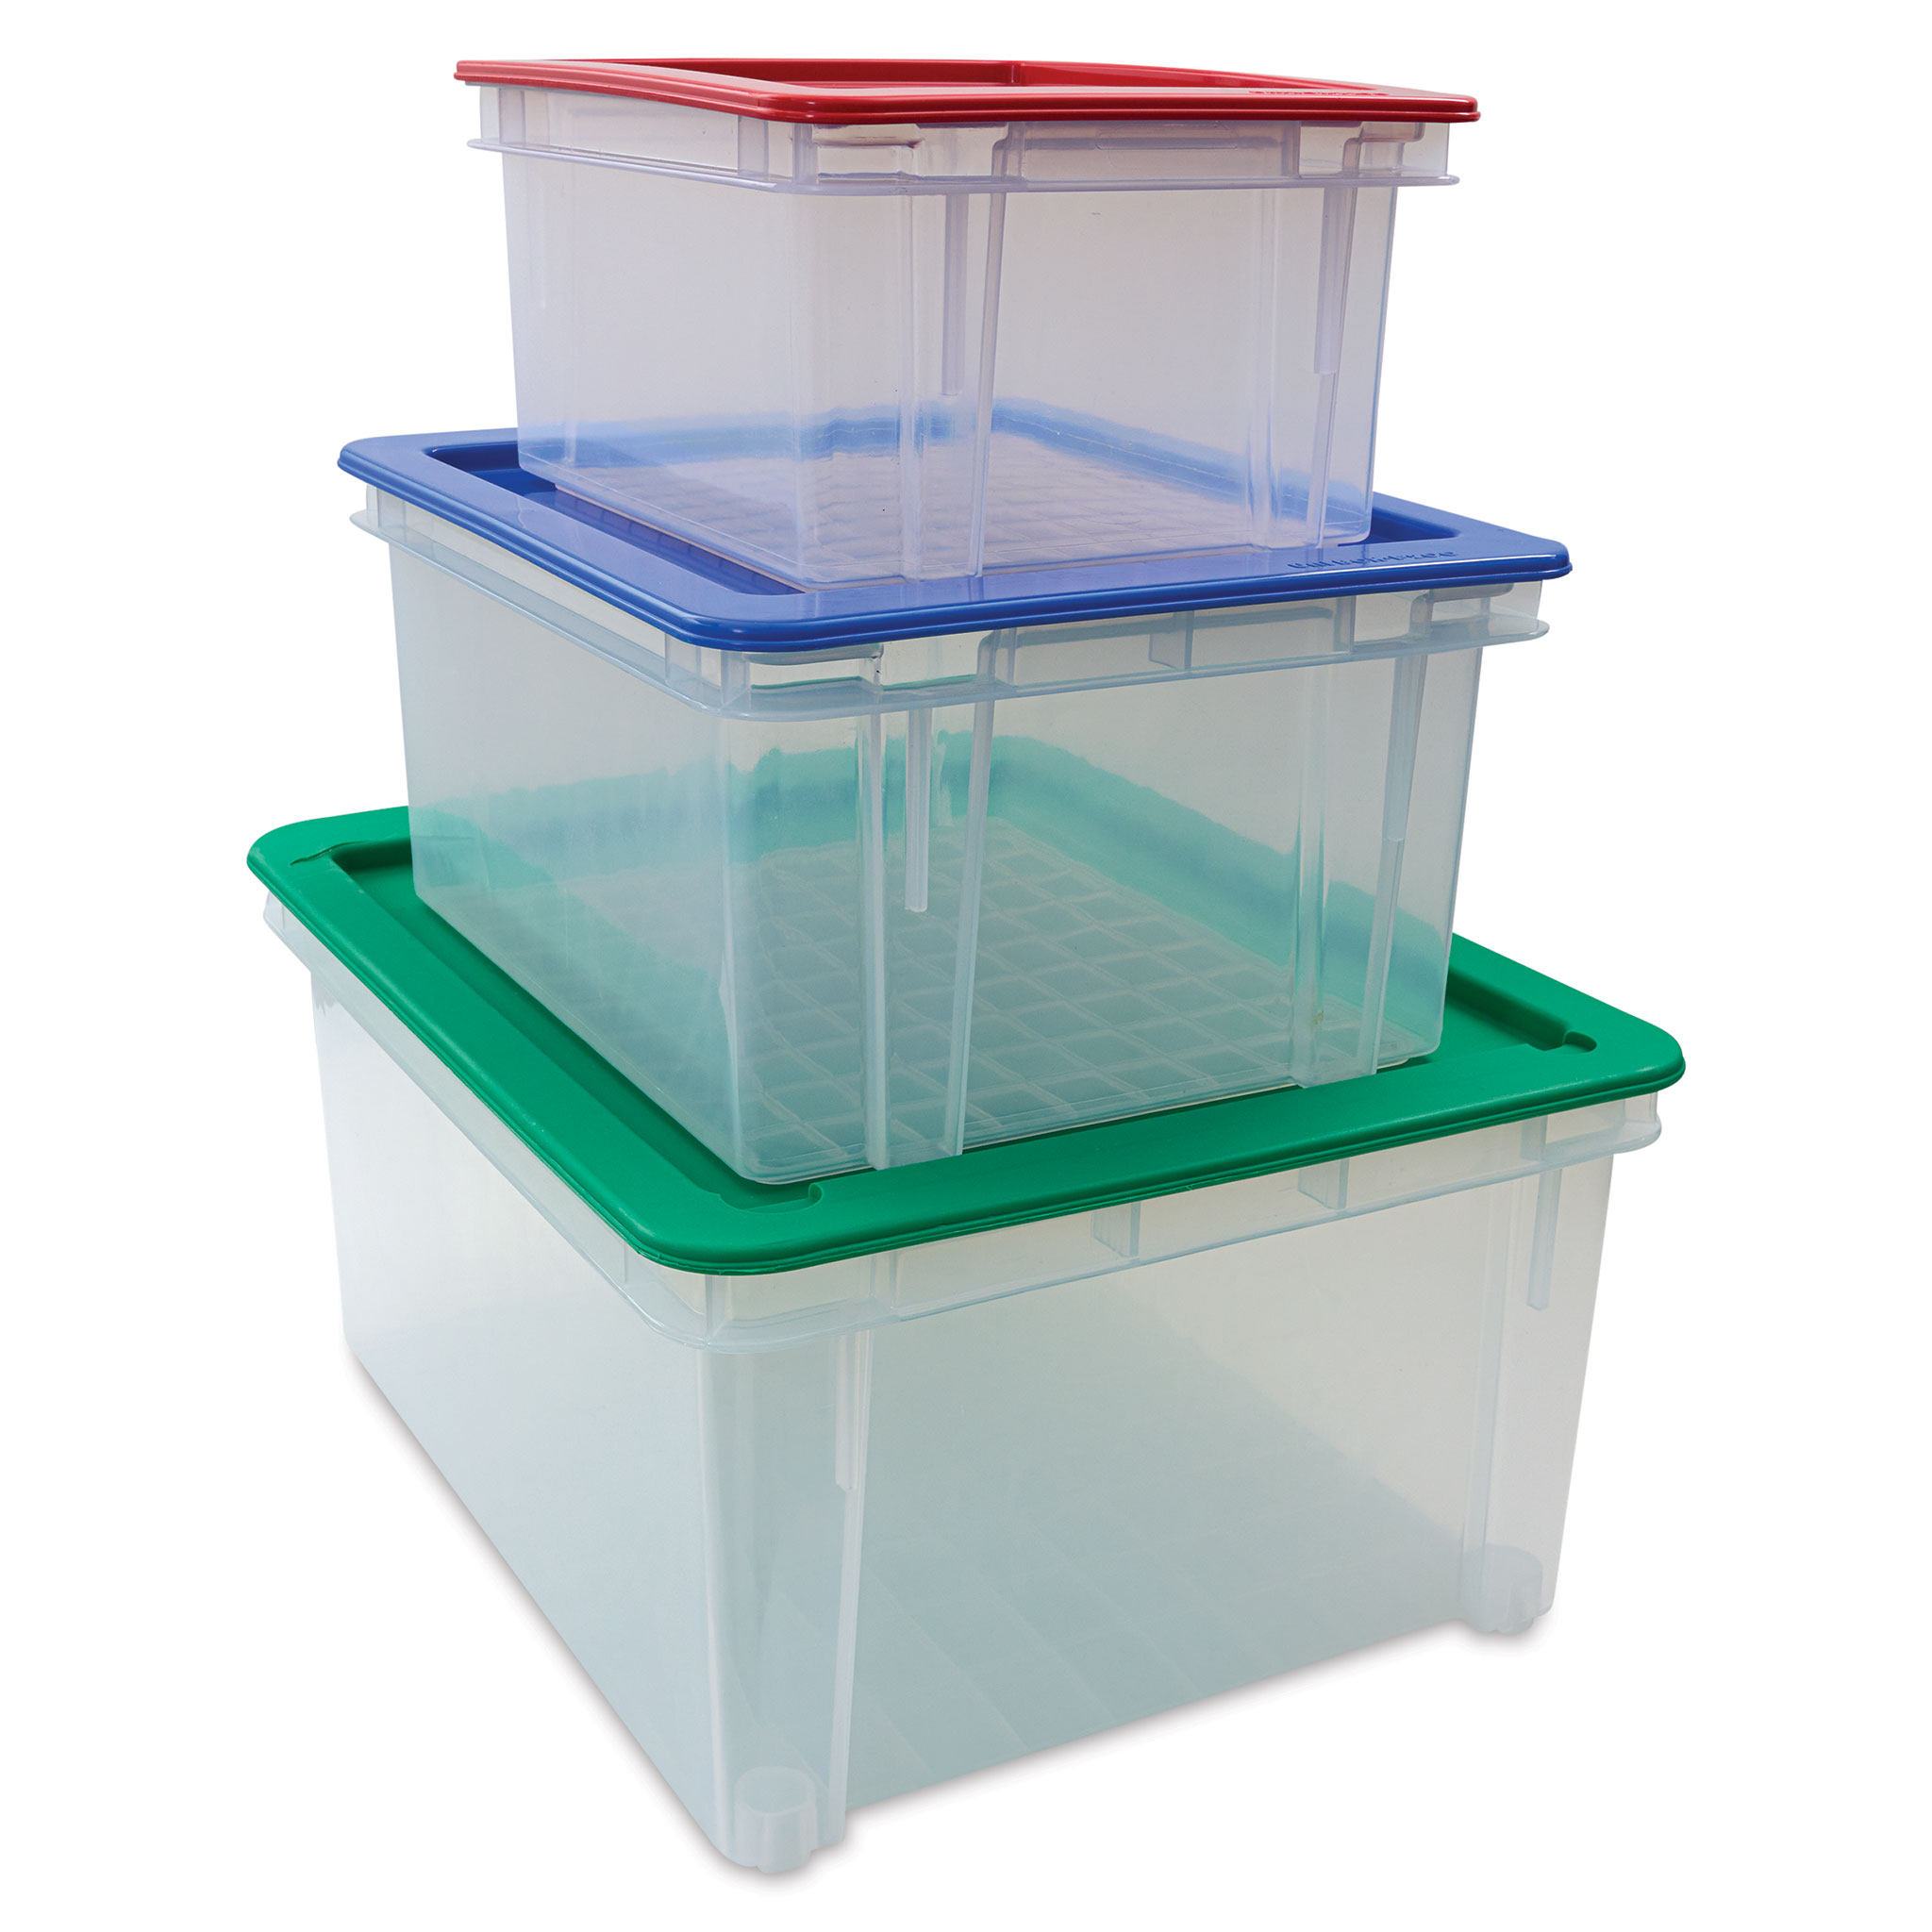 Really Useful Box Plastic Storage Container With Built-In Handles And Snap  Lid, 0.3 Liter, 4 3/4 x 3 1/4 x 2 1/2, Blue